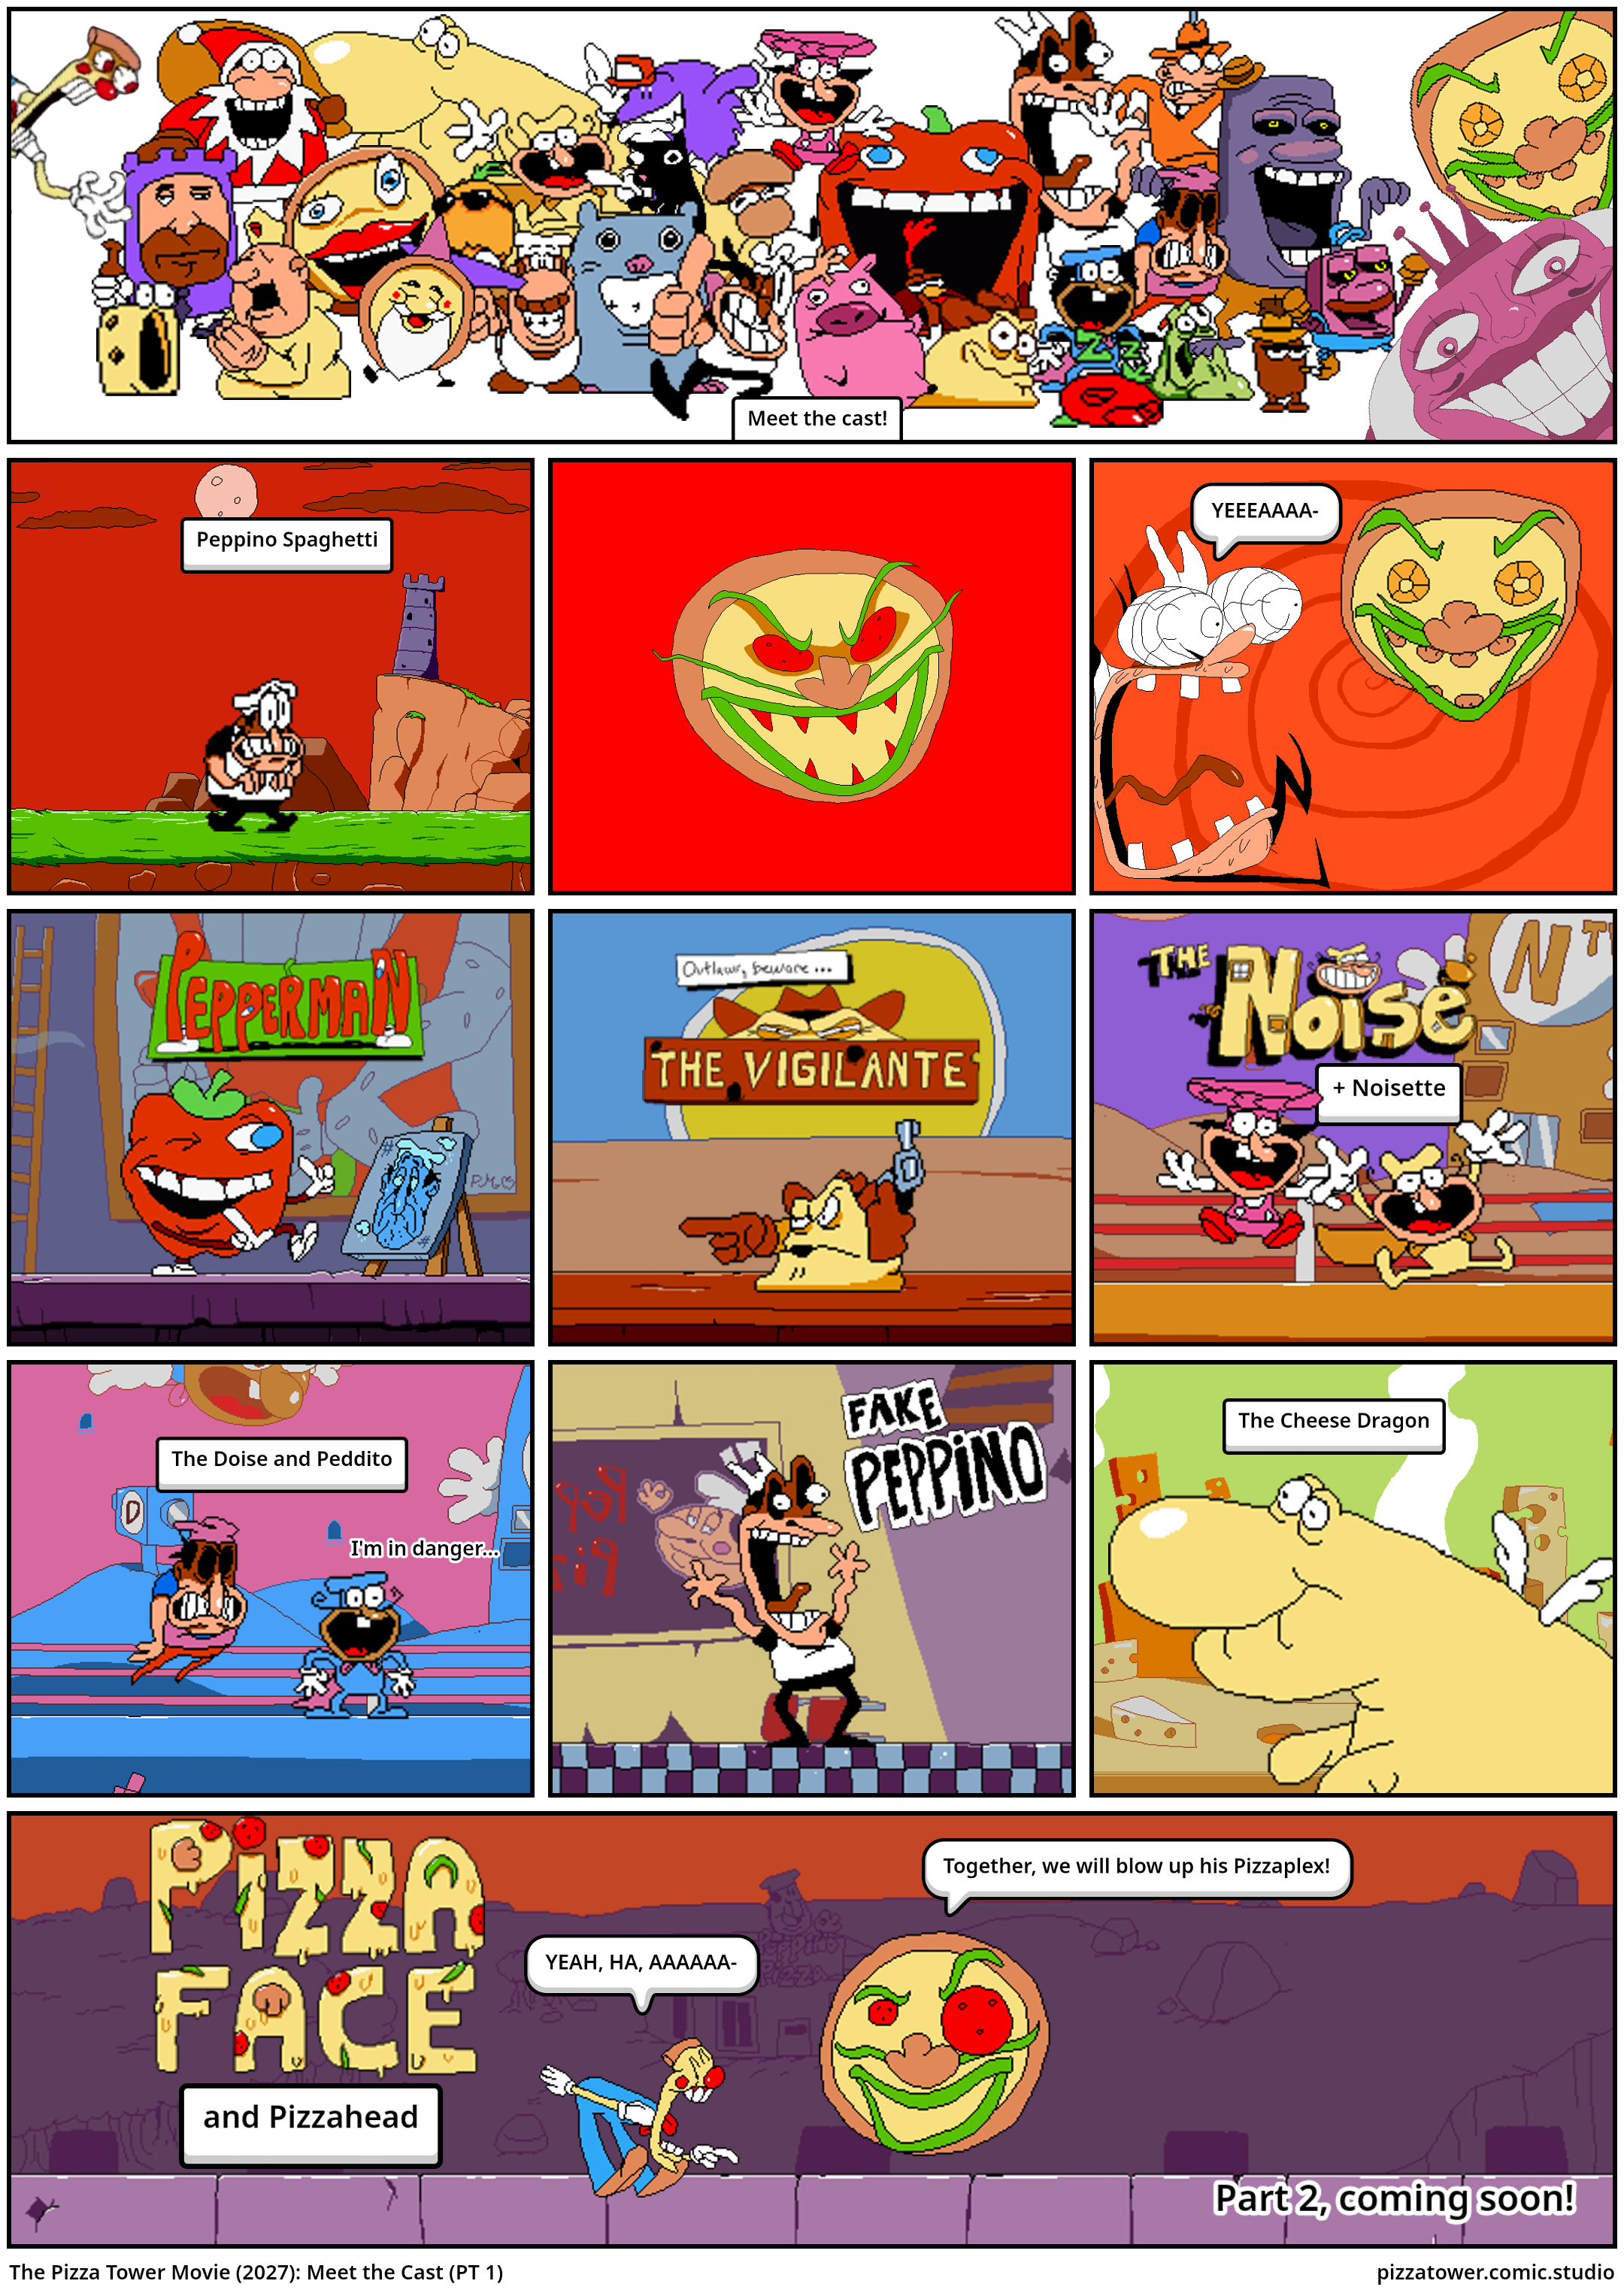 The Pizza Tower Movie (2027): Meet the Cast (PT 1)